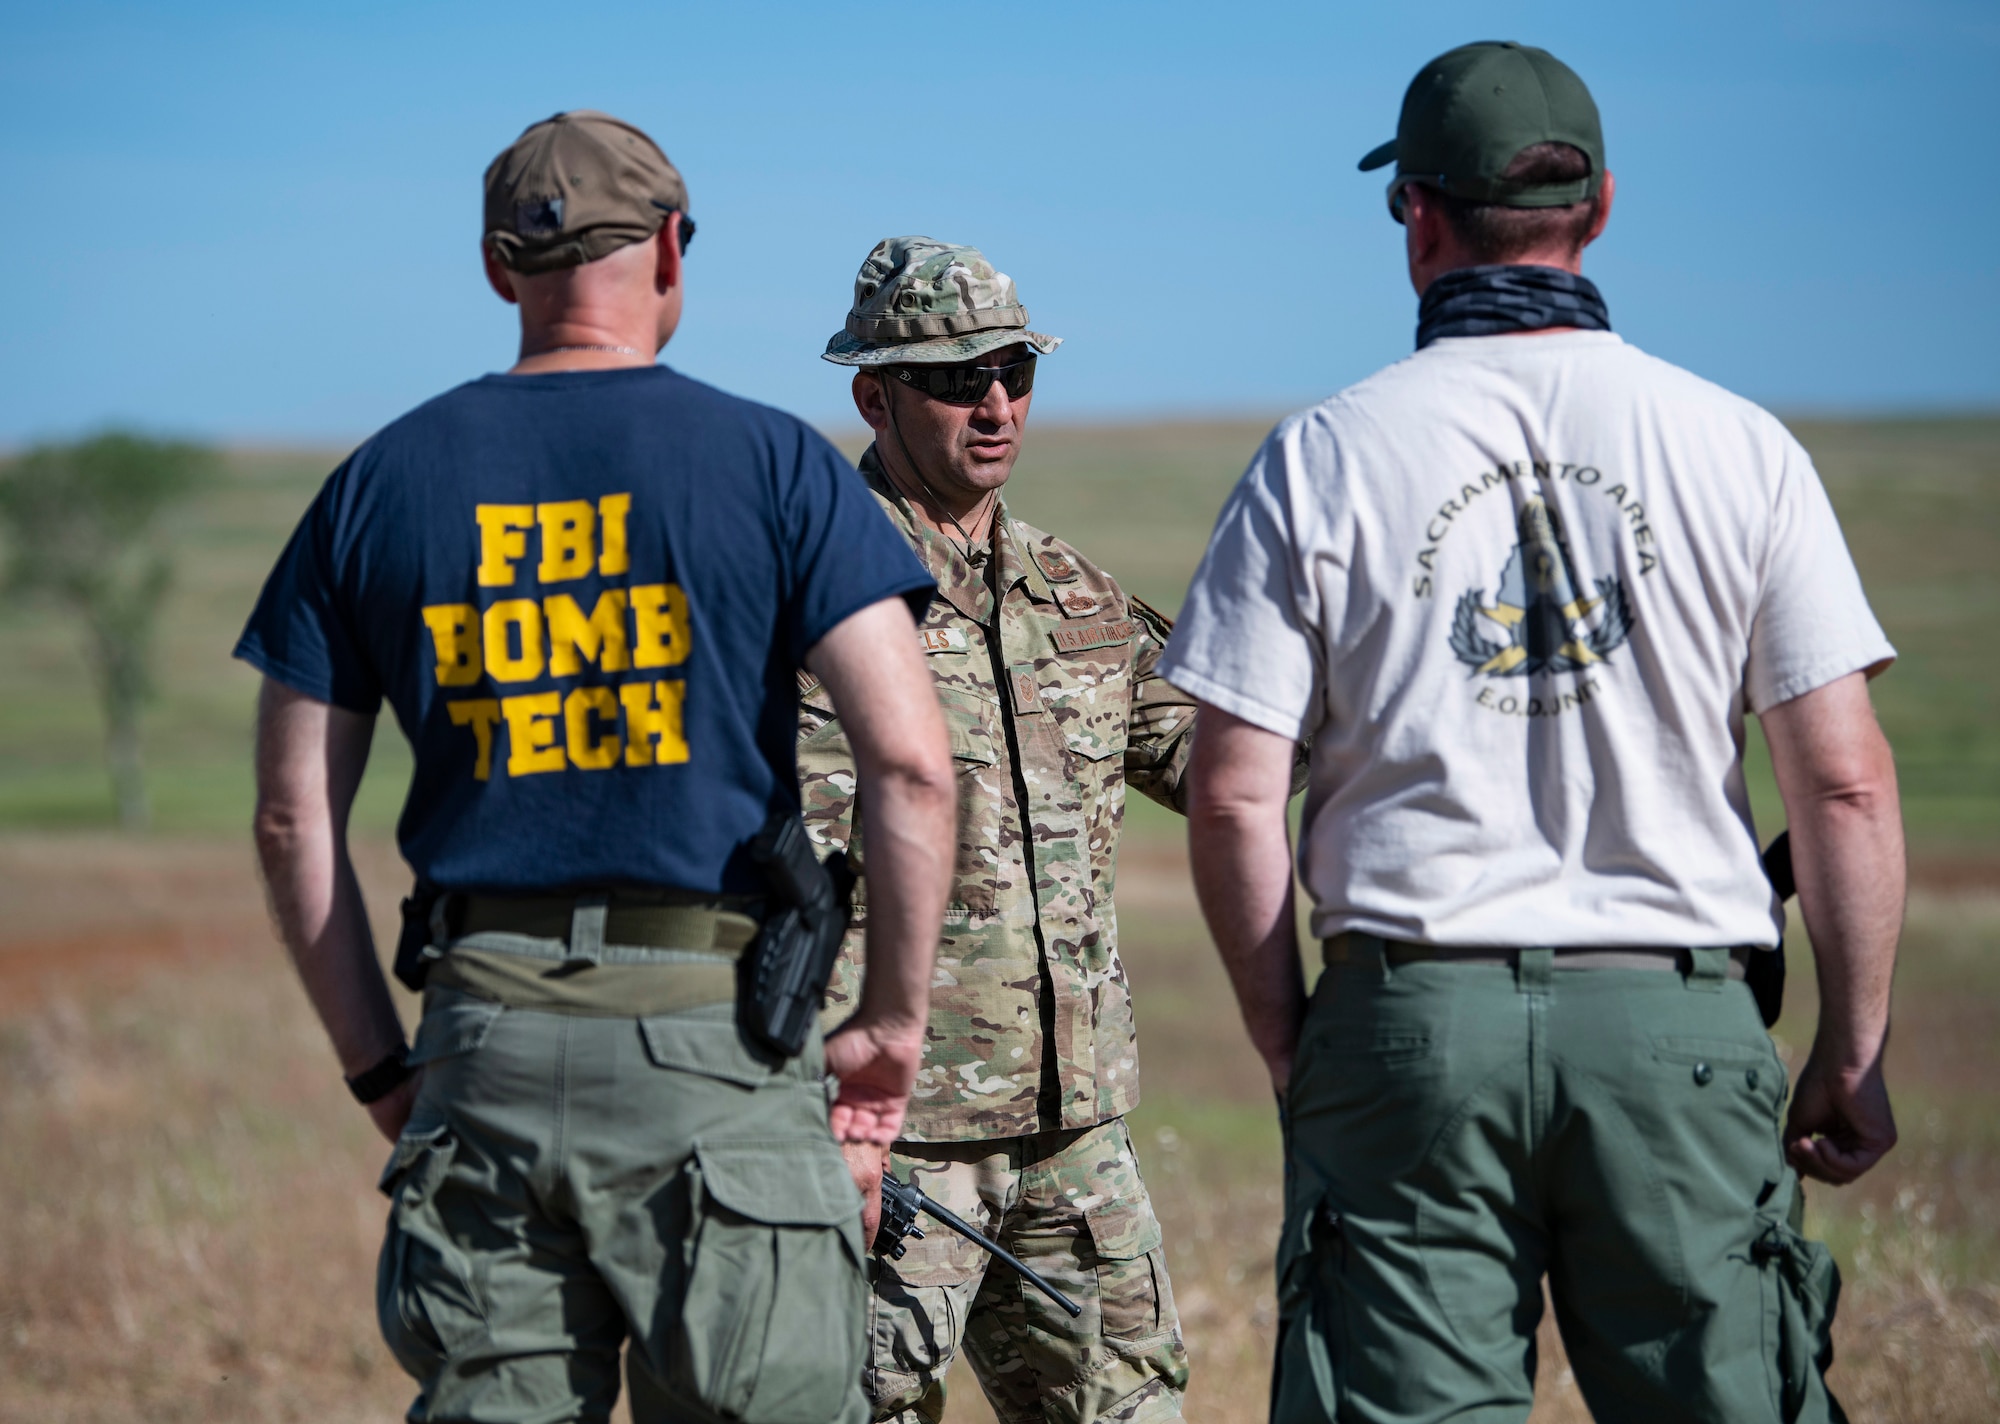 Master Sgt. Jayson Wells, 9th Civil Engineer Squadron Explosive Ordnance Disposal (EOD) superintendent, center, talks with members of the FBI and Sacramento Sheriff’s office.